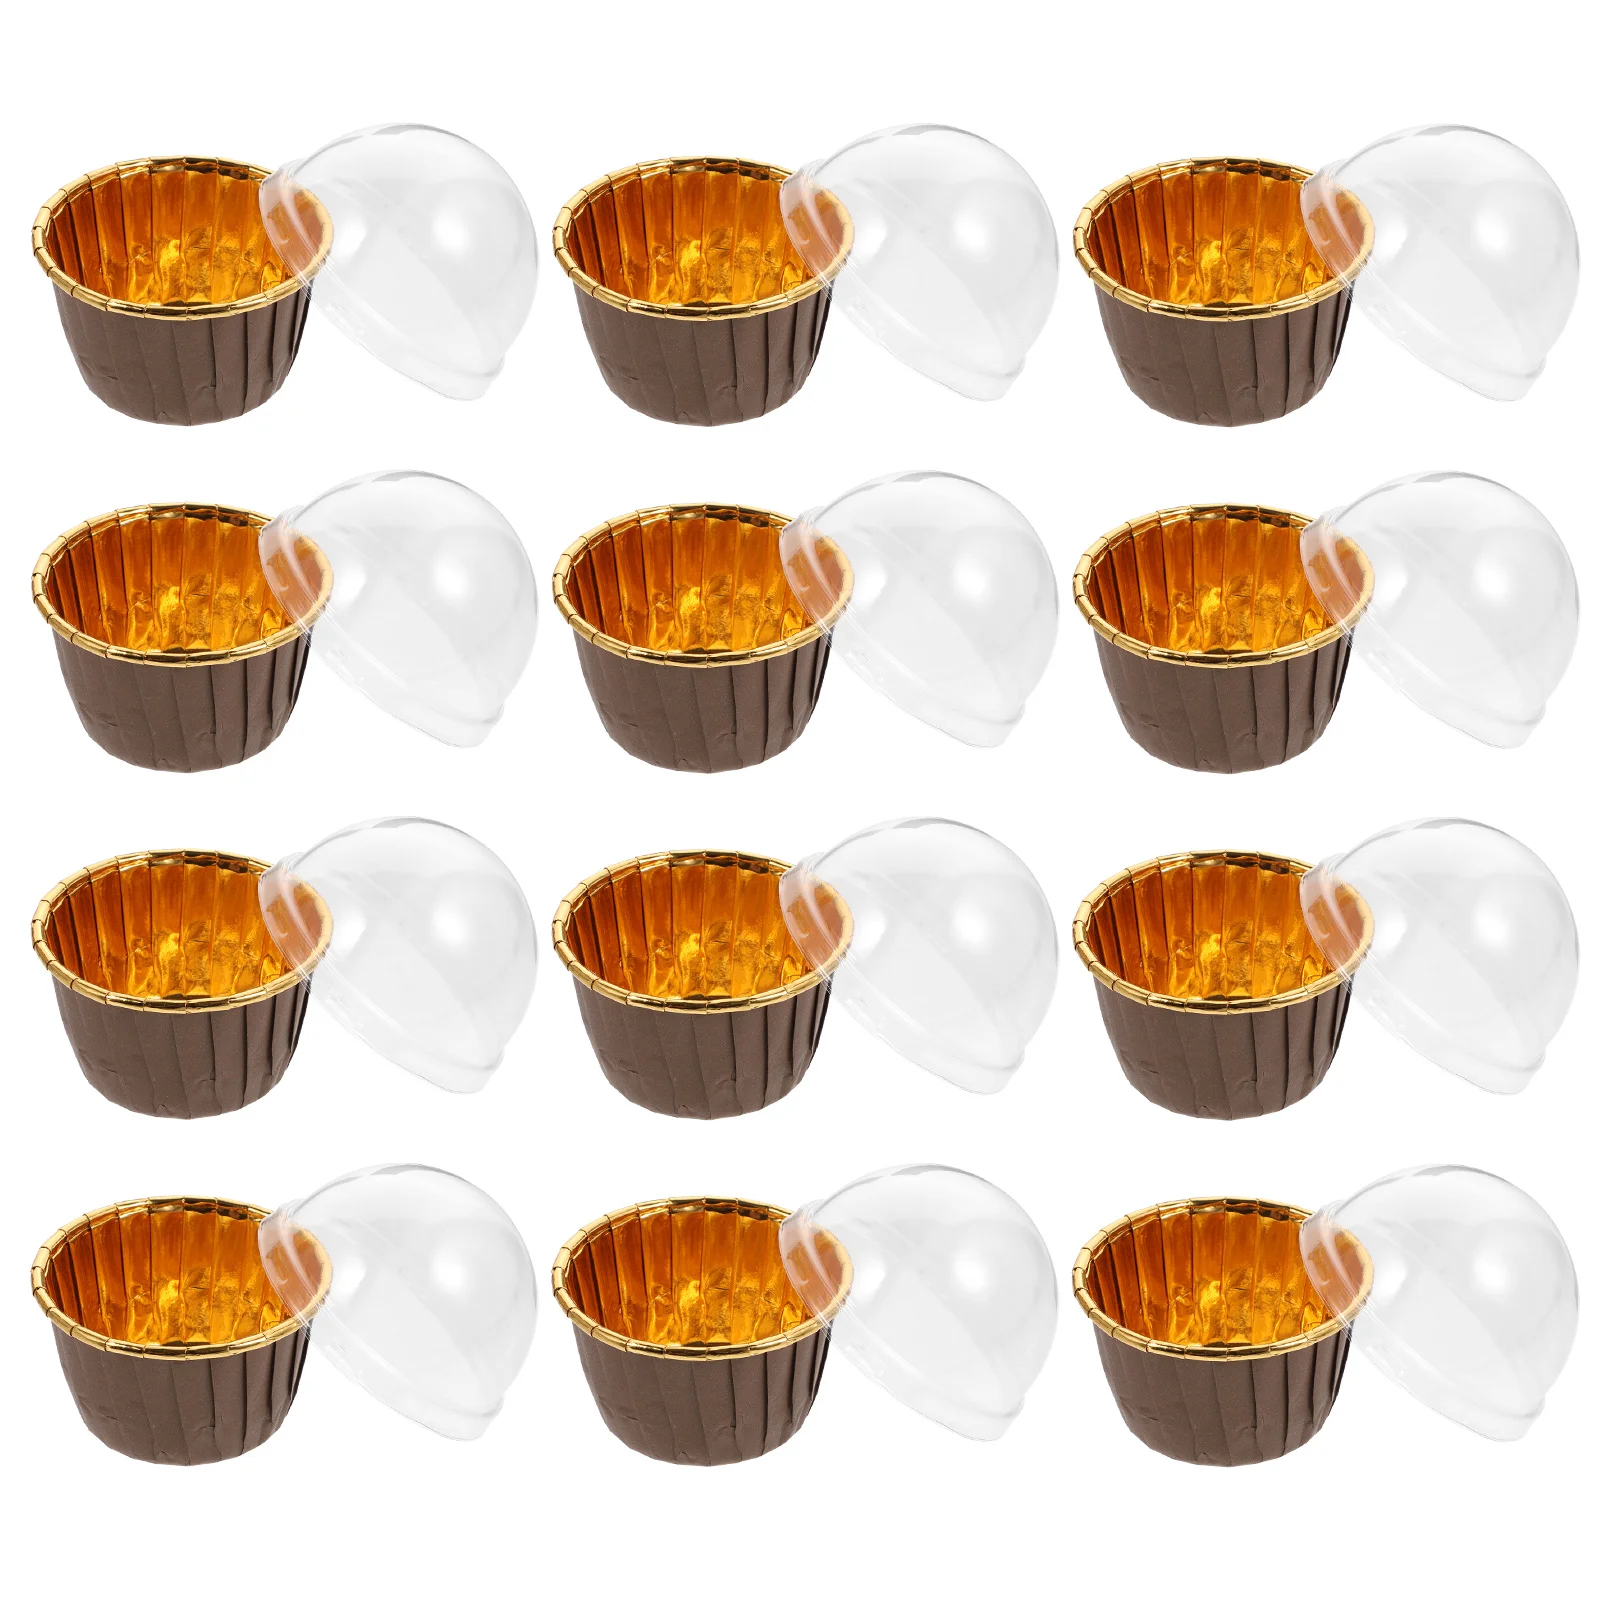 

100 Pcs Mini Containers Roll Cup Curling Paper Cups Cake 6.8X6.8CM Dessert Molds Coffee Baking Kitchen Supplies